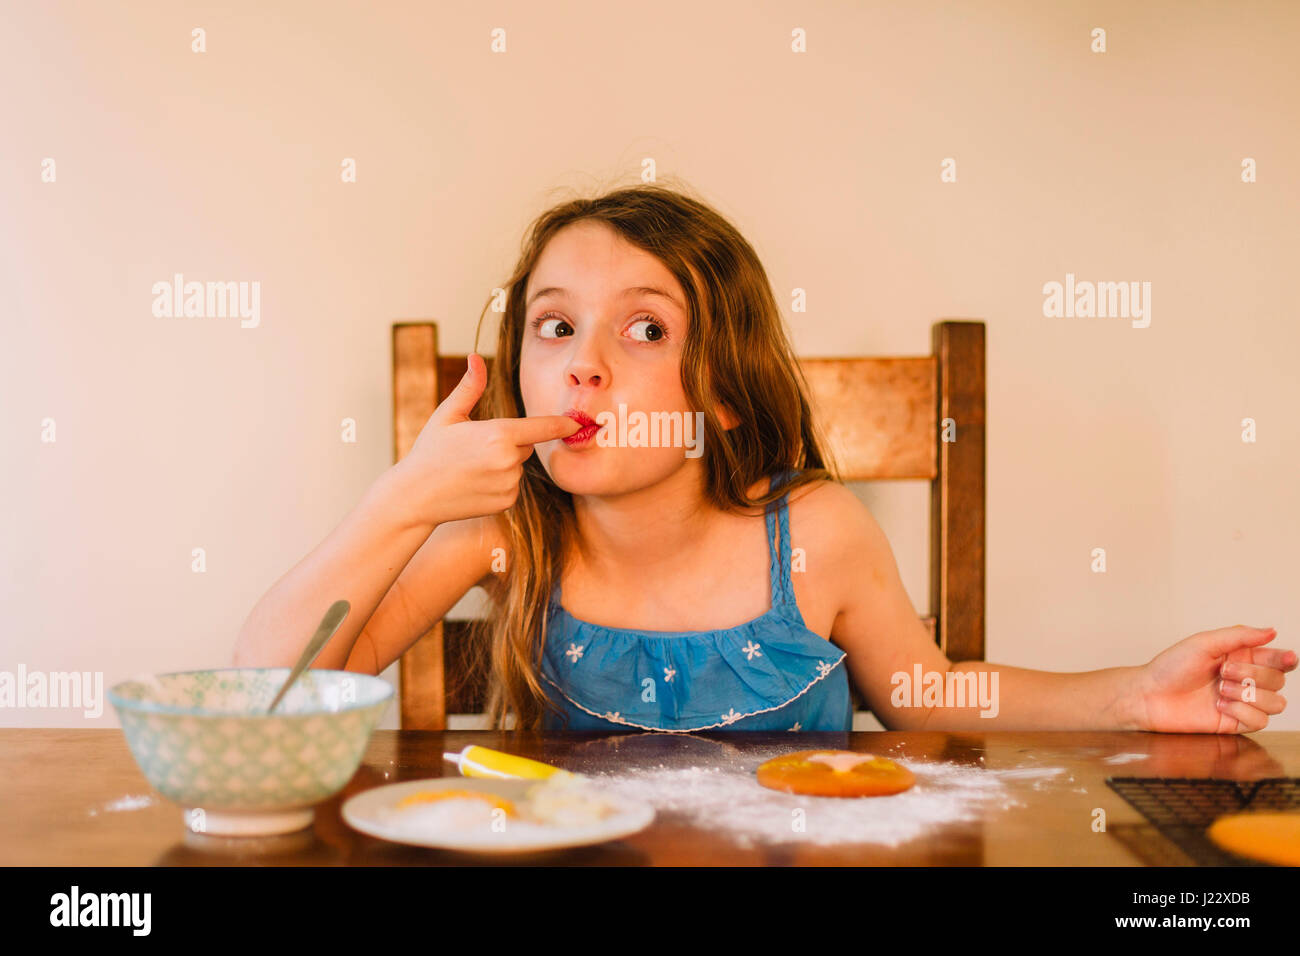 Portrait of girl decorating biscuits at home Stock Photo